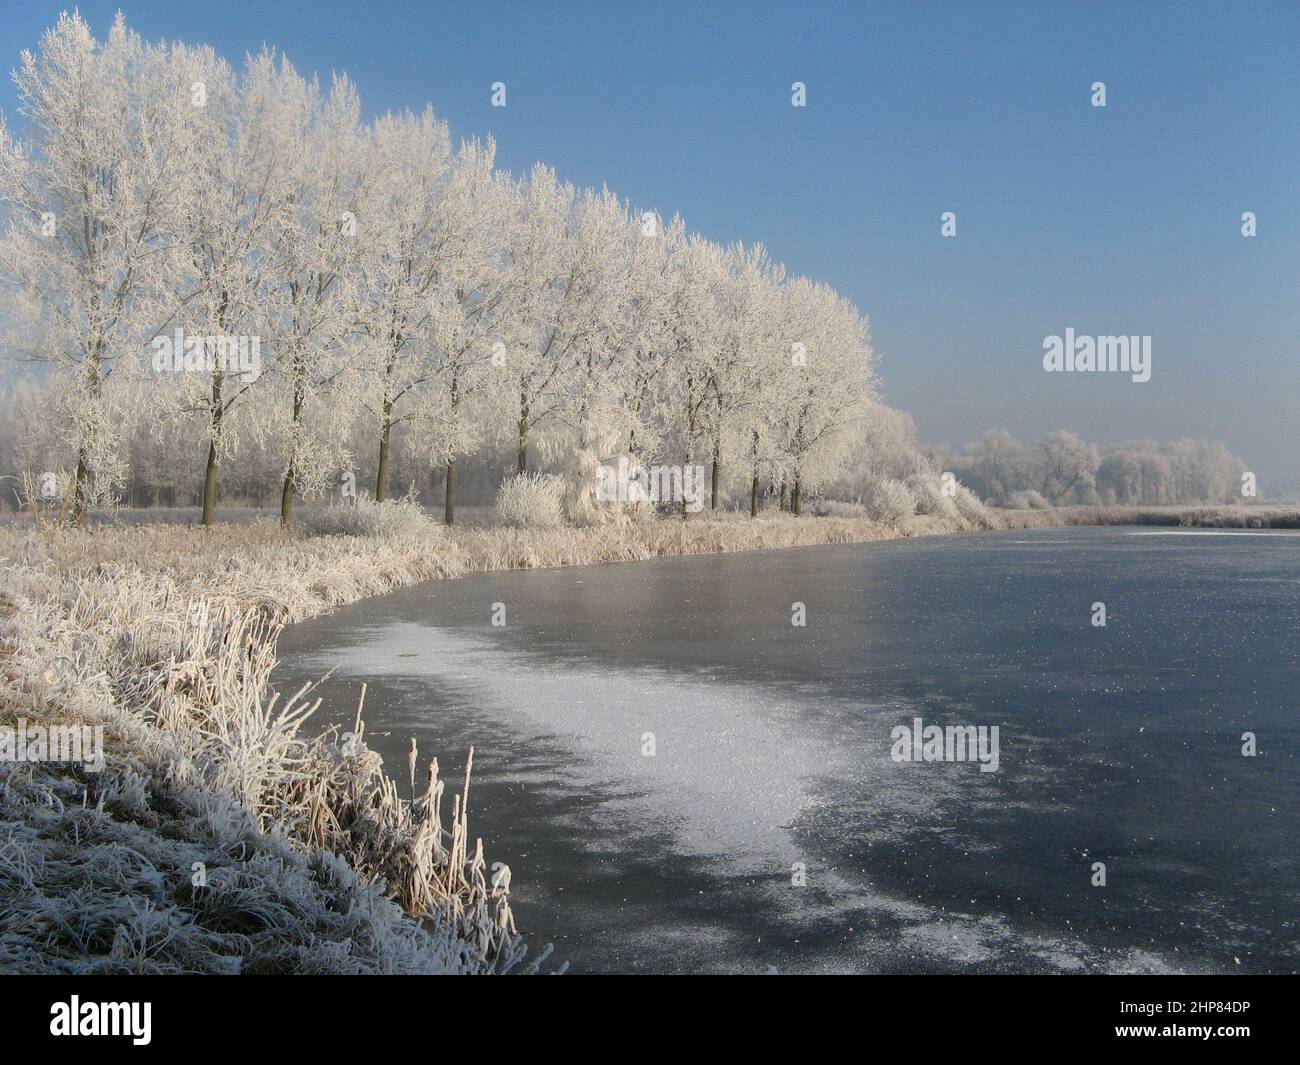 wonderful white winter landscape in the dutch countryside in zeeland with a beautiful row of large trees with hoar frost next to a frozen lake in wint Stock Photo